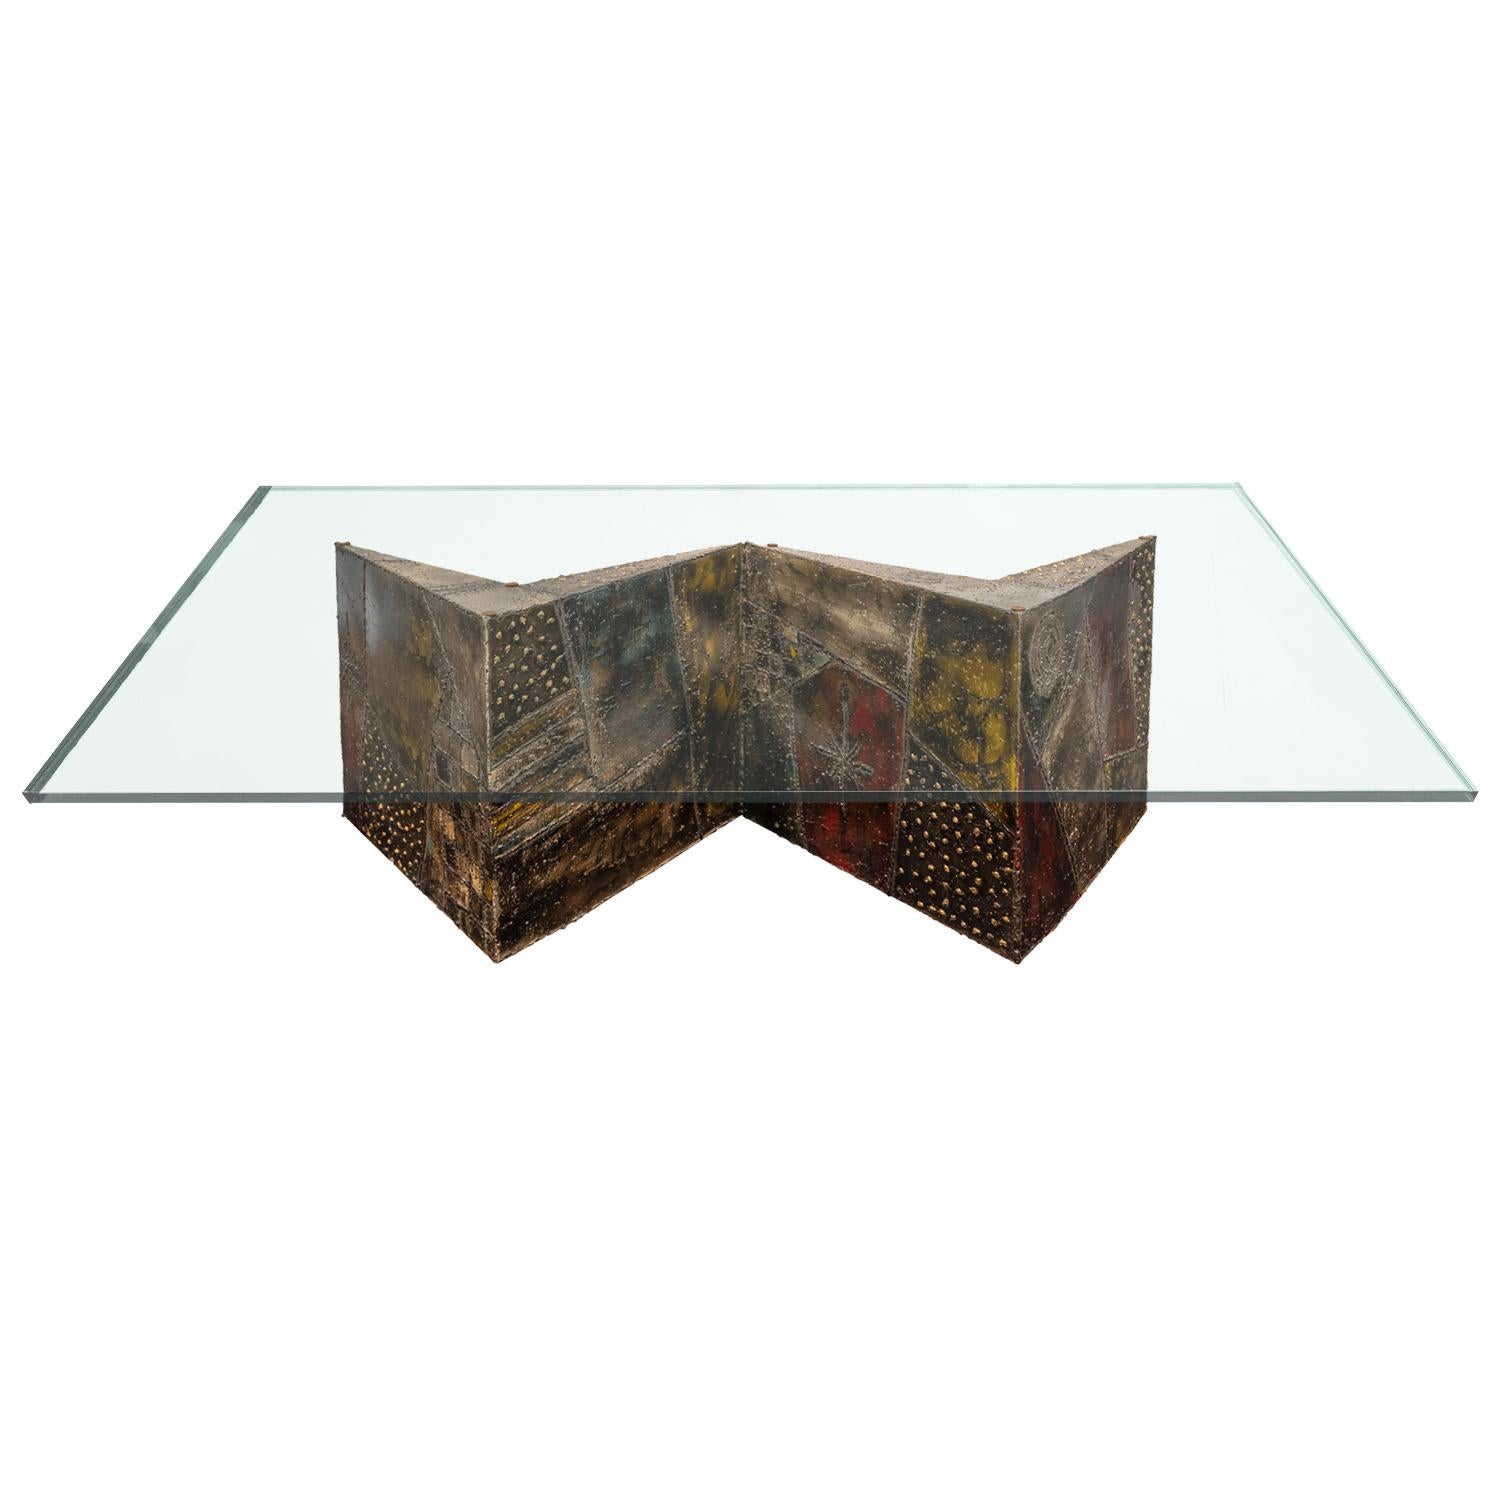 Artisan welded coffee table with hand-painted polychrome enamels, zig zag design with glass top, by Paul Evans, American 1969 (signed and dated “PE69” on side). The exuberant form and the beautiful colors make this table a real stand out. Dimensions